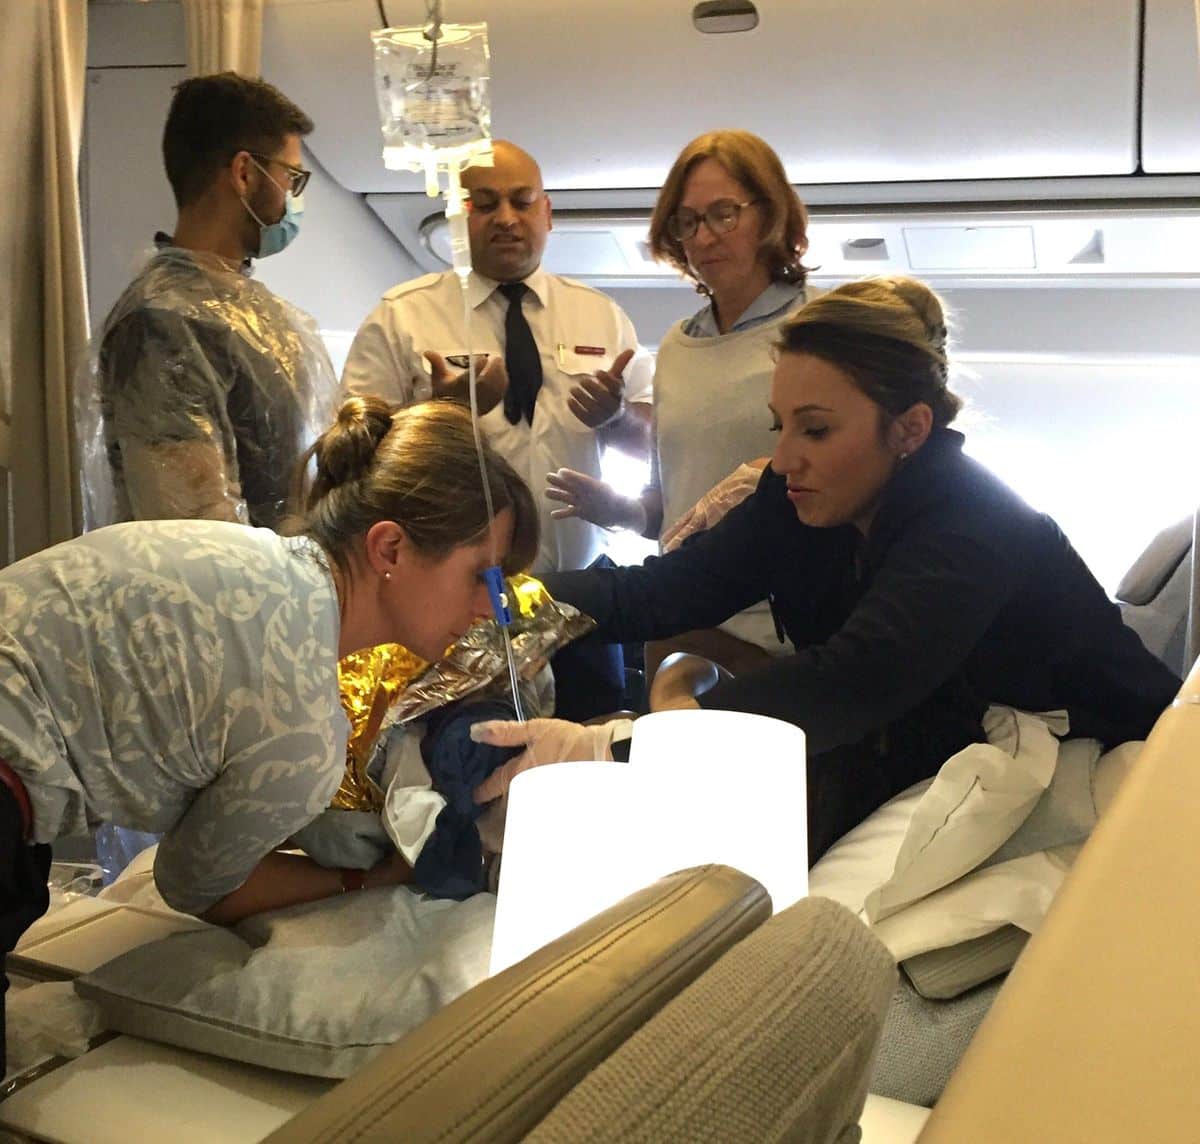 Cleveland Clinic doctor delivers baby on international flight (photos)